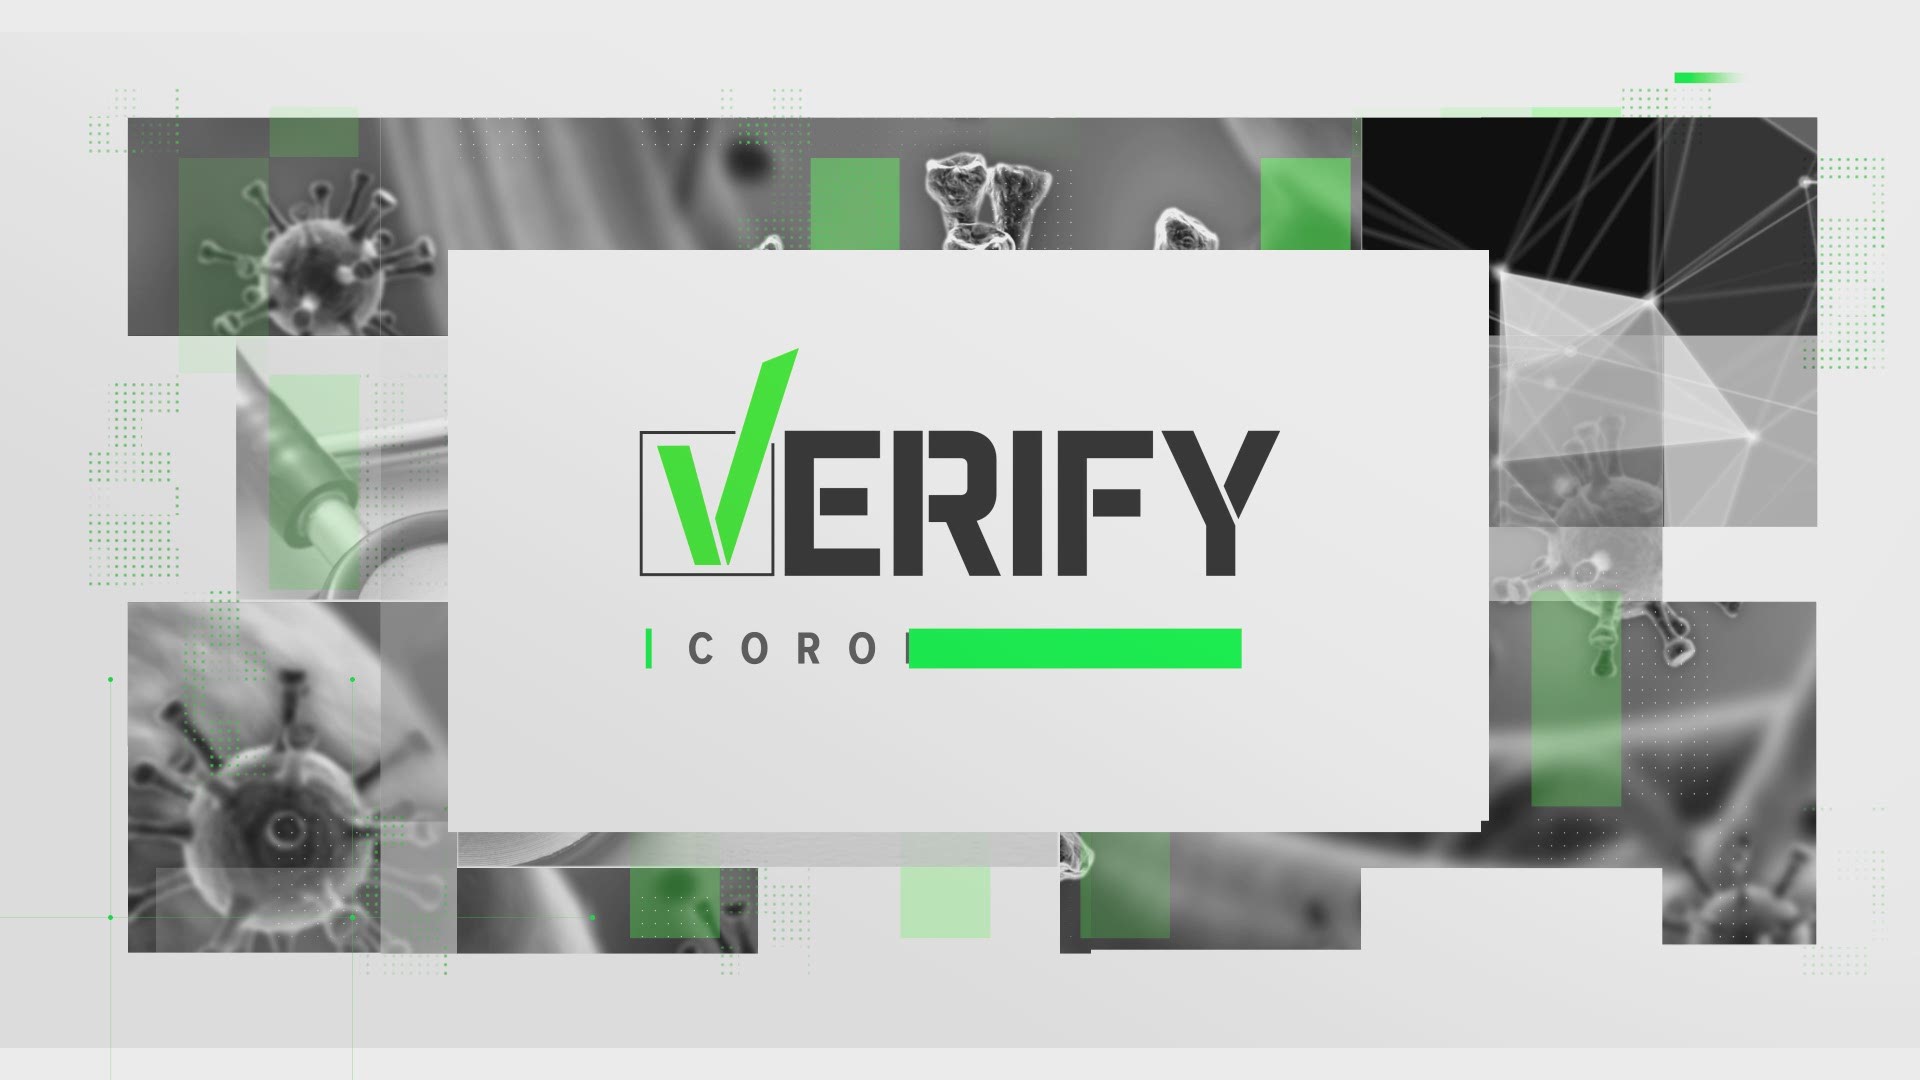 The VERIFY Team looked into whether one needs a vaccine before they can fly internationally.